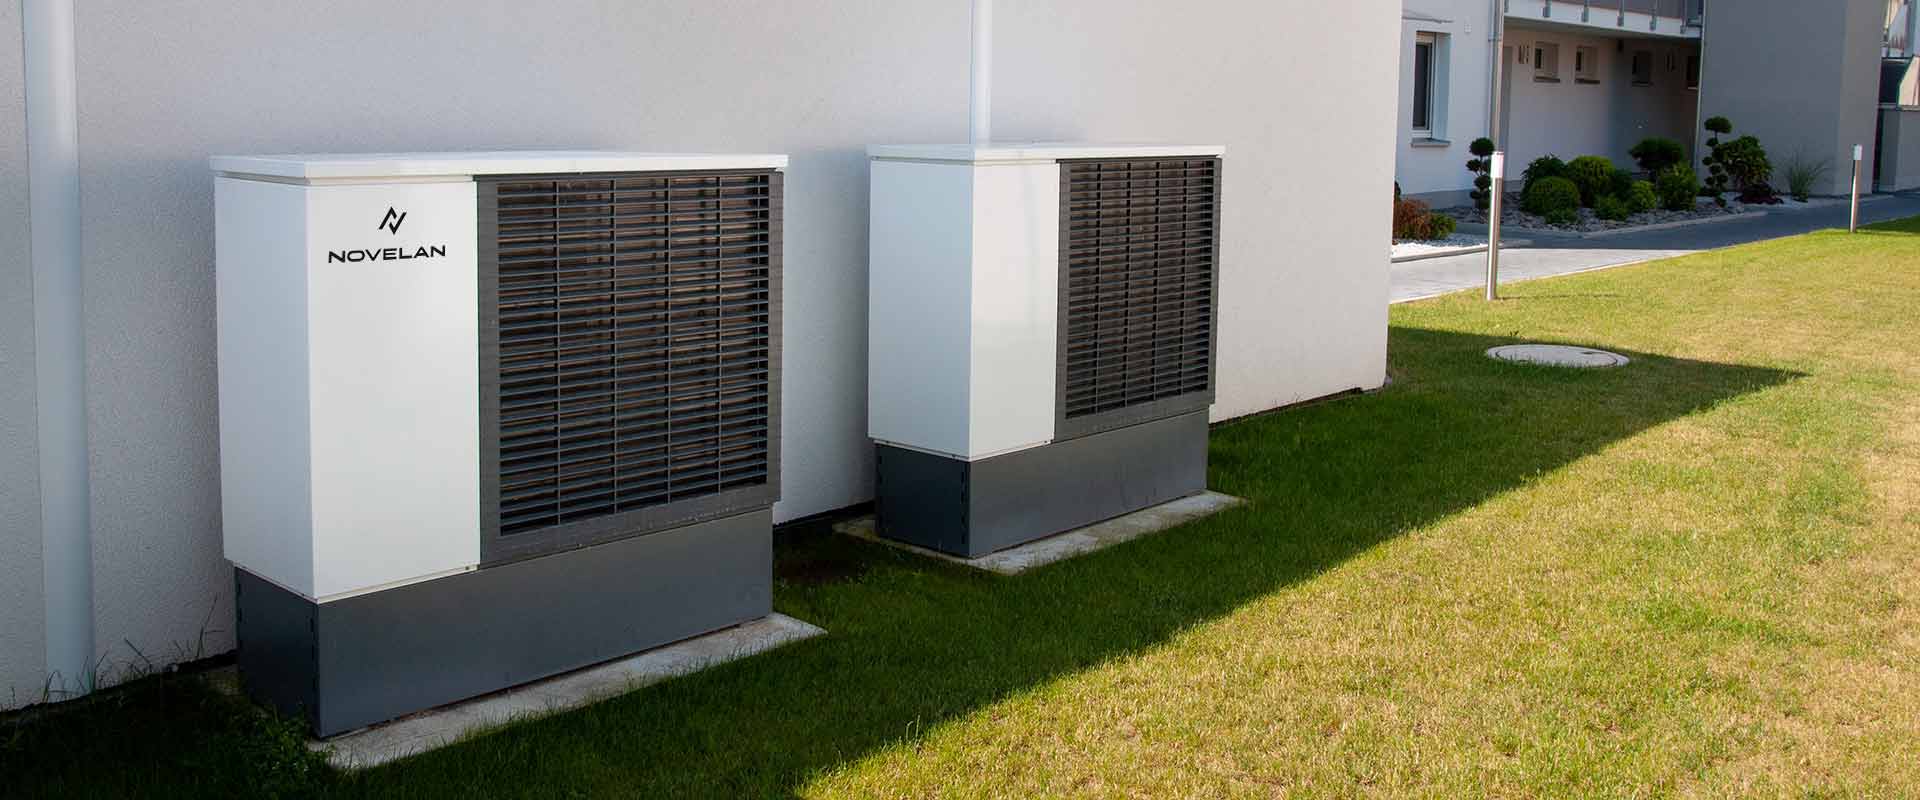 Two LADV heat pumps are installed next to each other in front of a house wall on a meadow. In the background on the right, the entrance and a paved way to the front door can be seen.